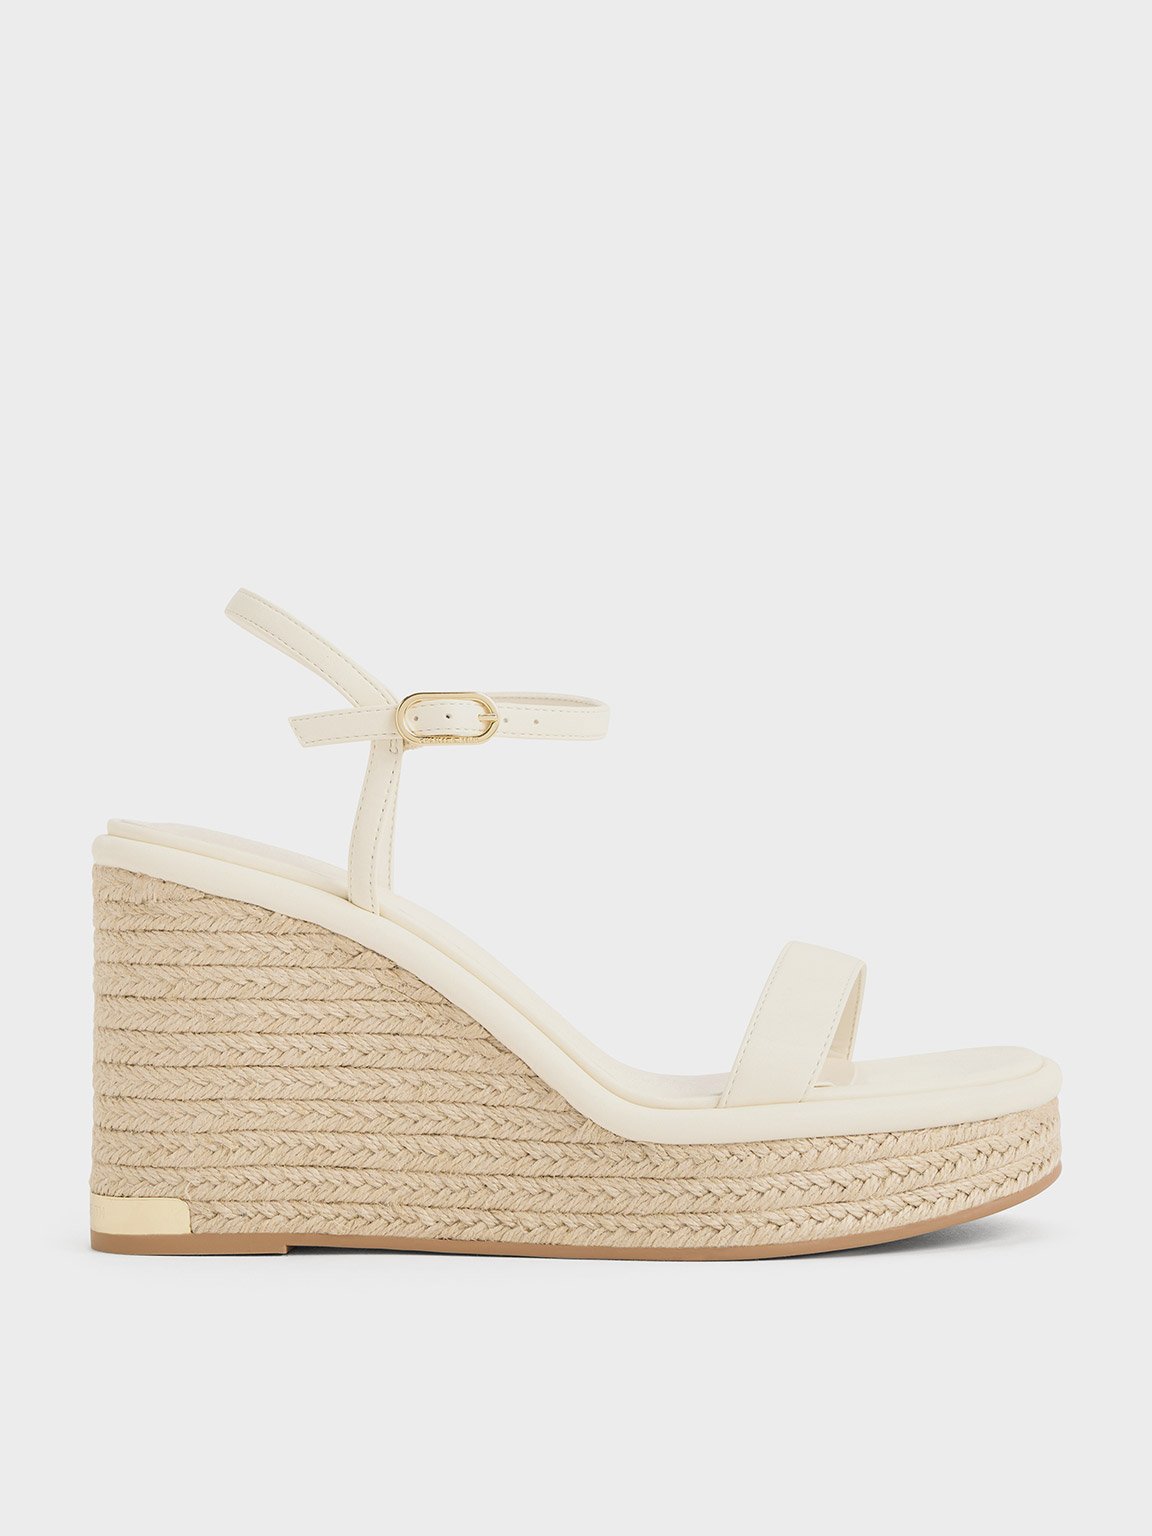 Charles & Keith Espadrille Wedges In Cream